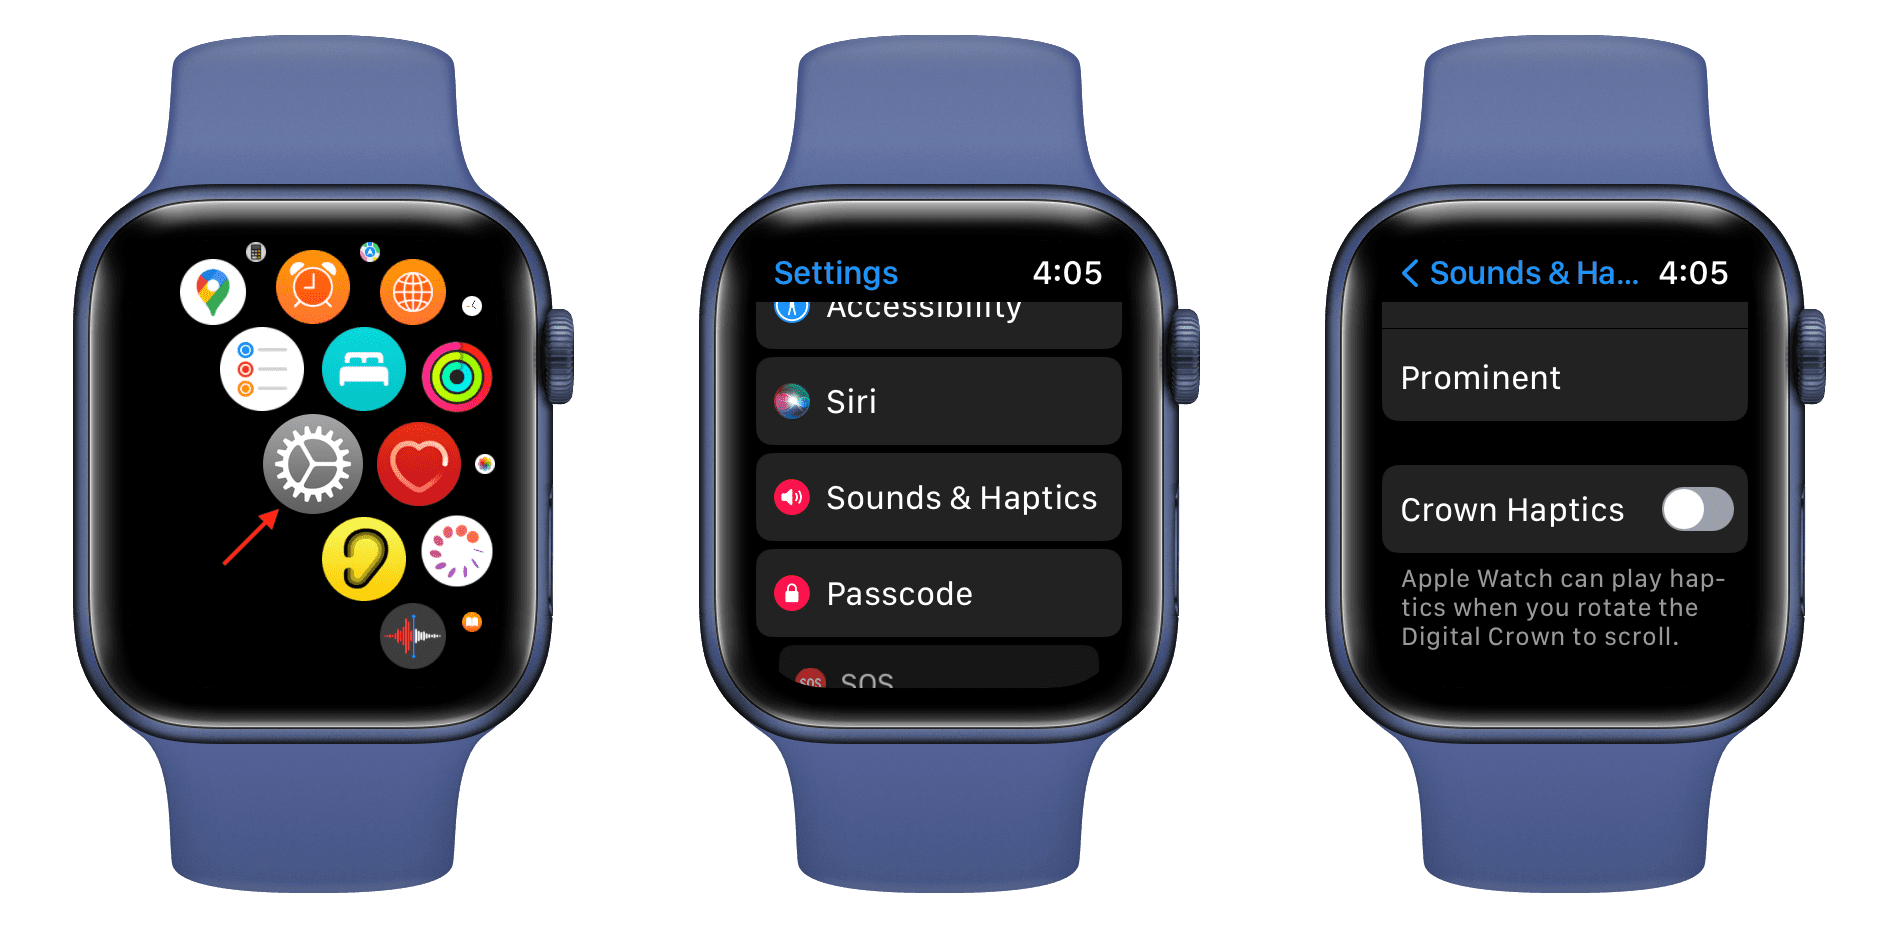 Turn off Crown Haptics from Apple Watch settings